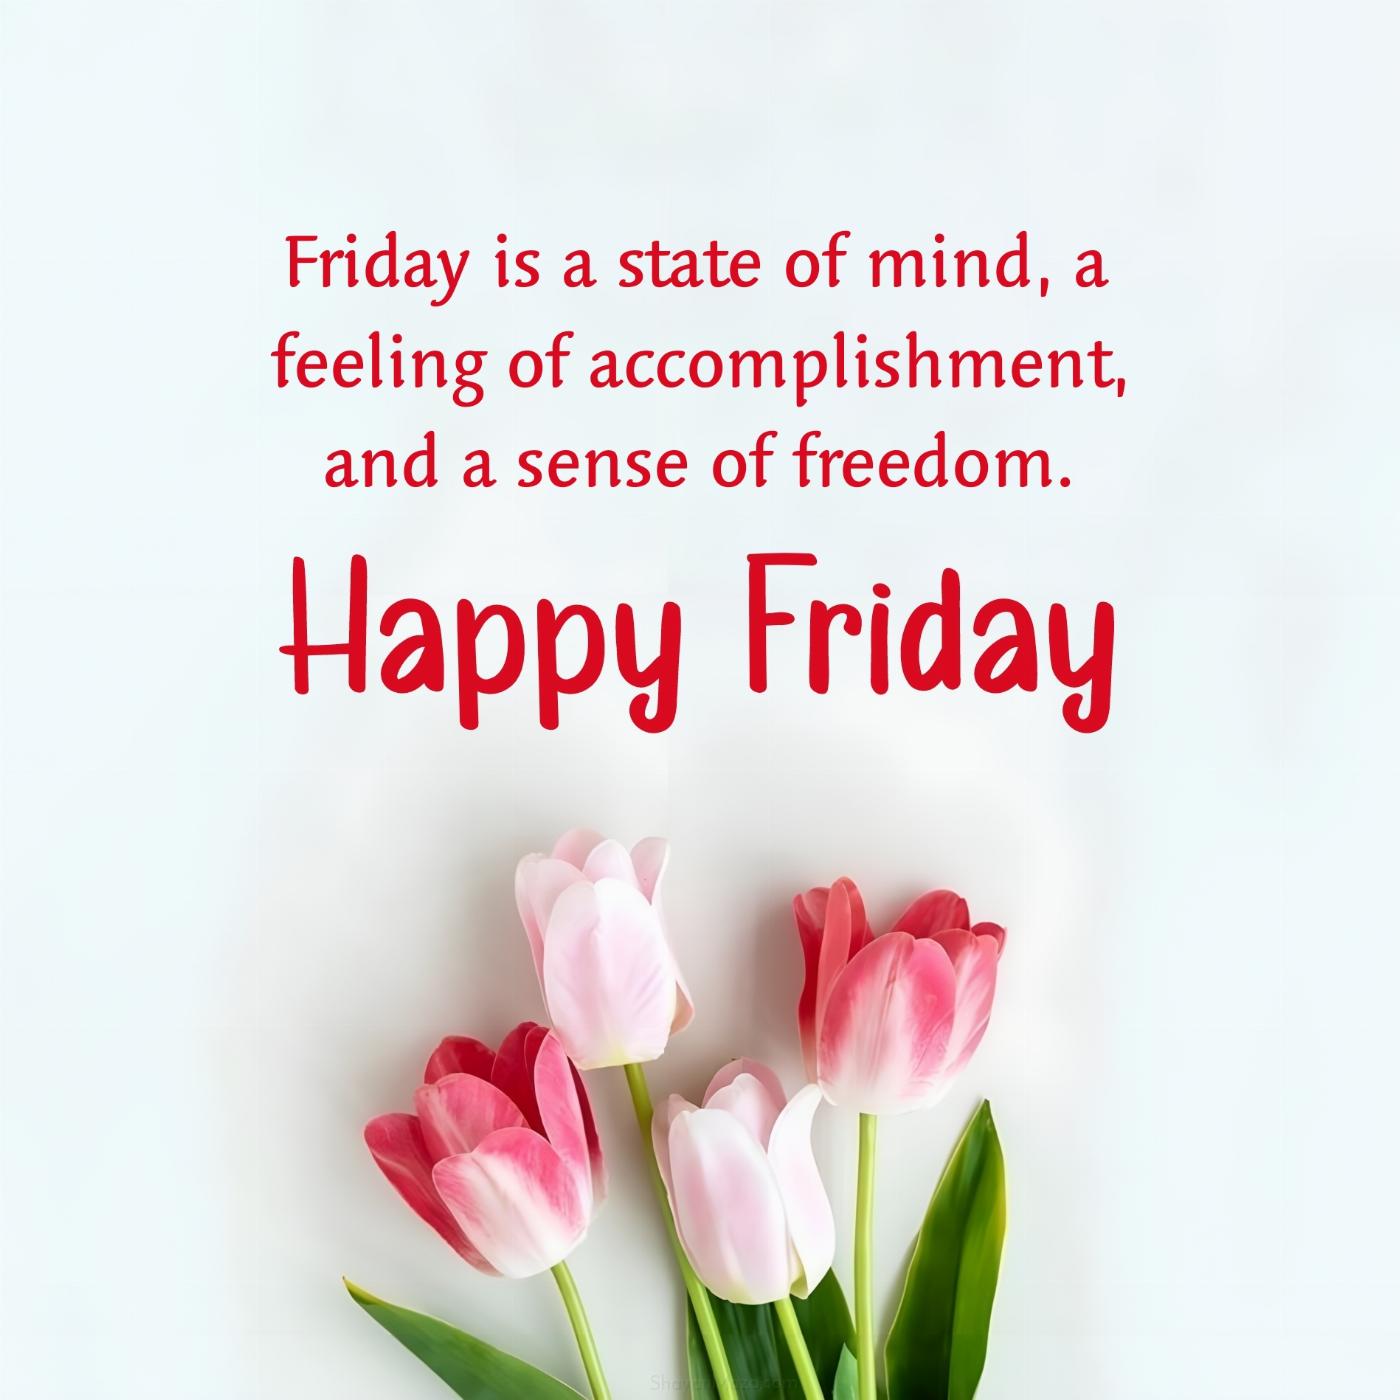 Friday is a state of mind a feeling of accomplishment